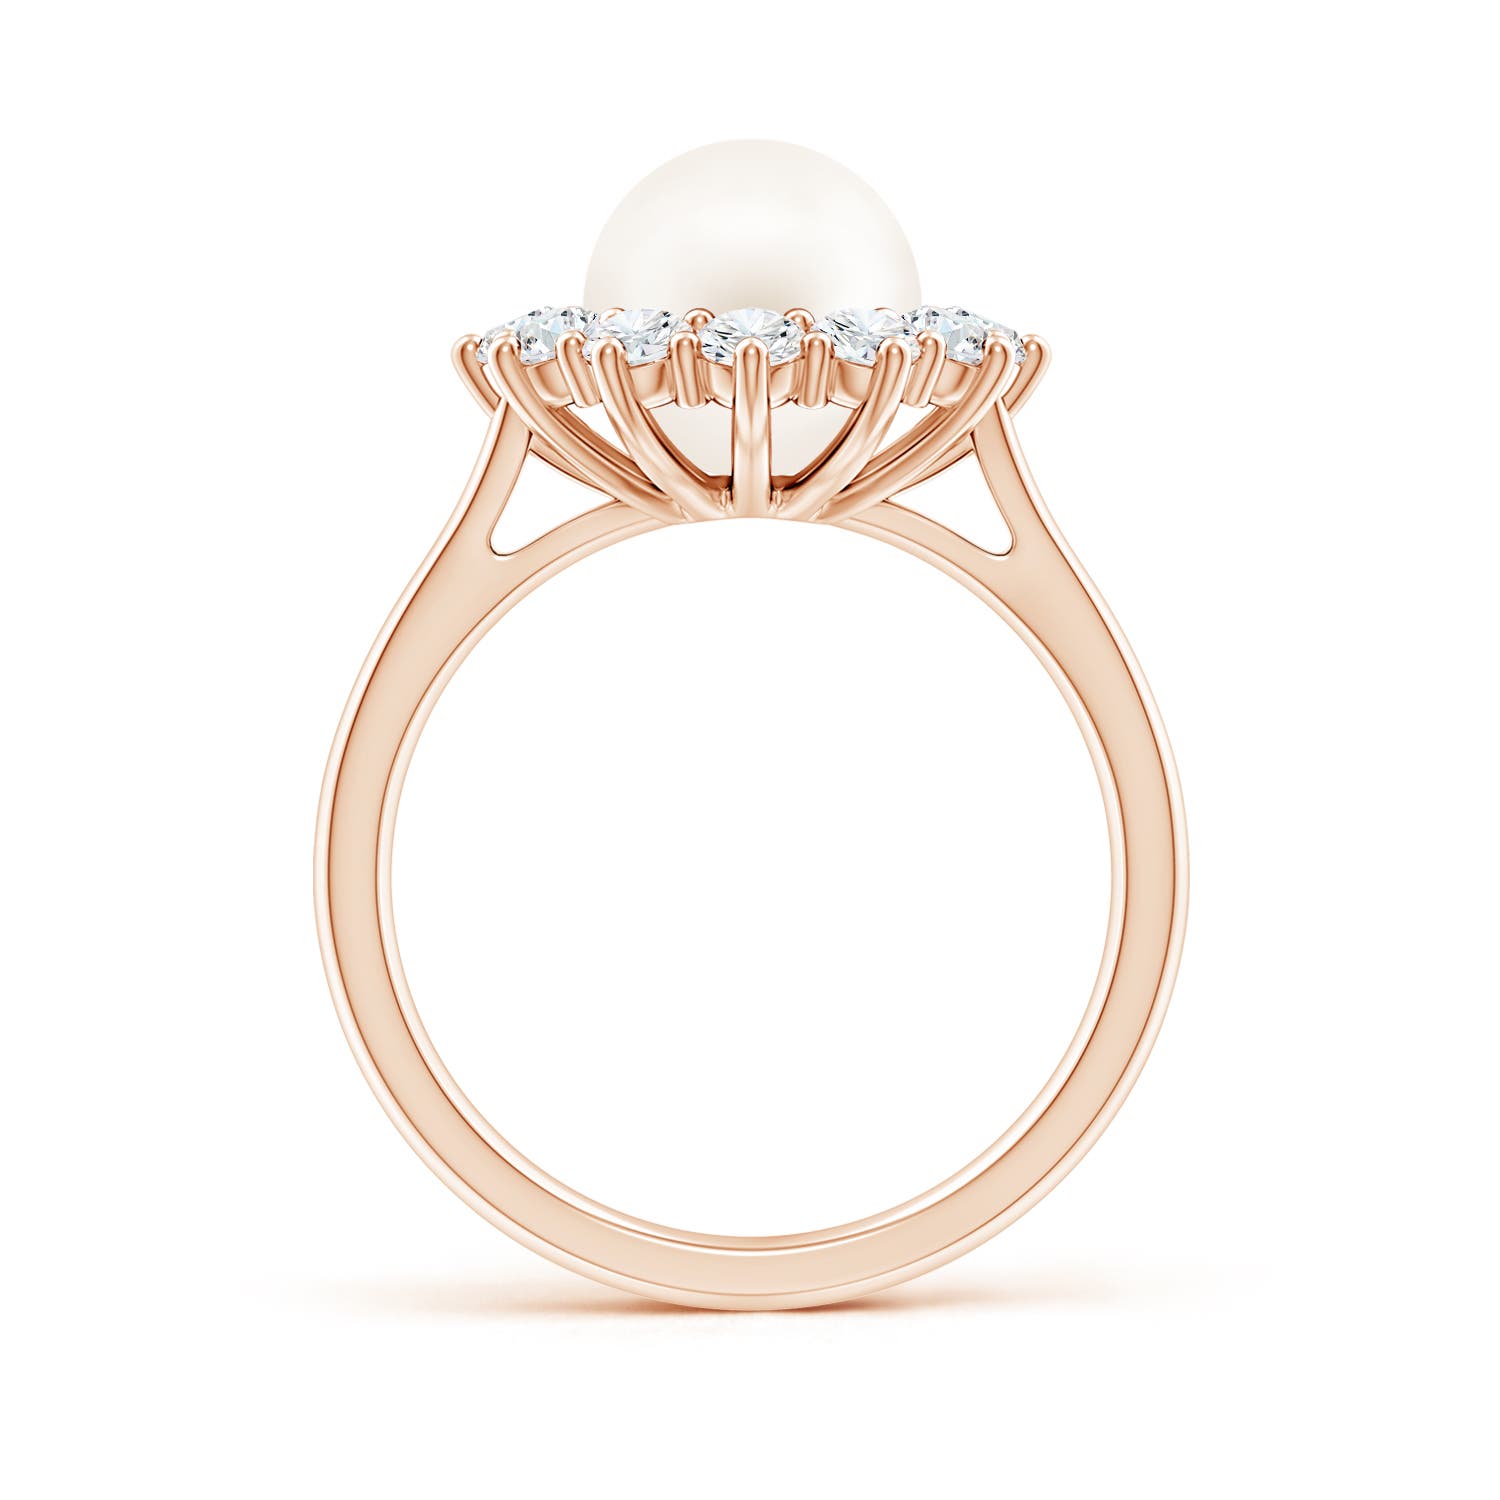 AA / 4.4 CT / 14 KT Rose Gold